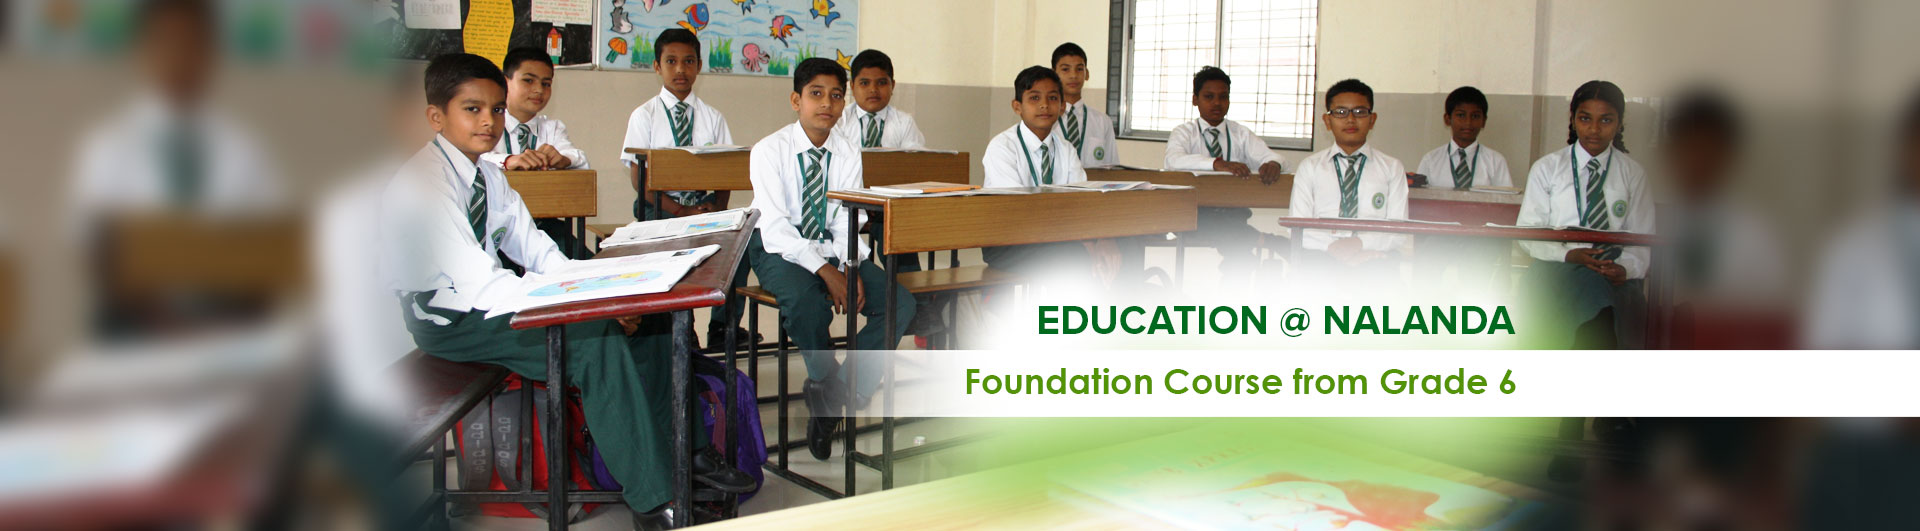 Foundation course from Grade 6